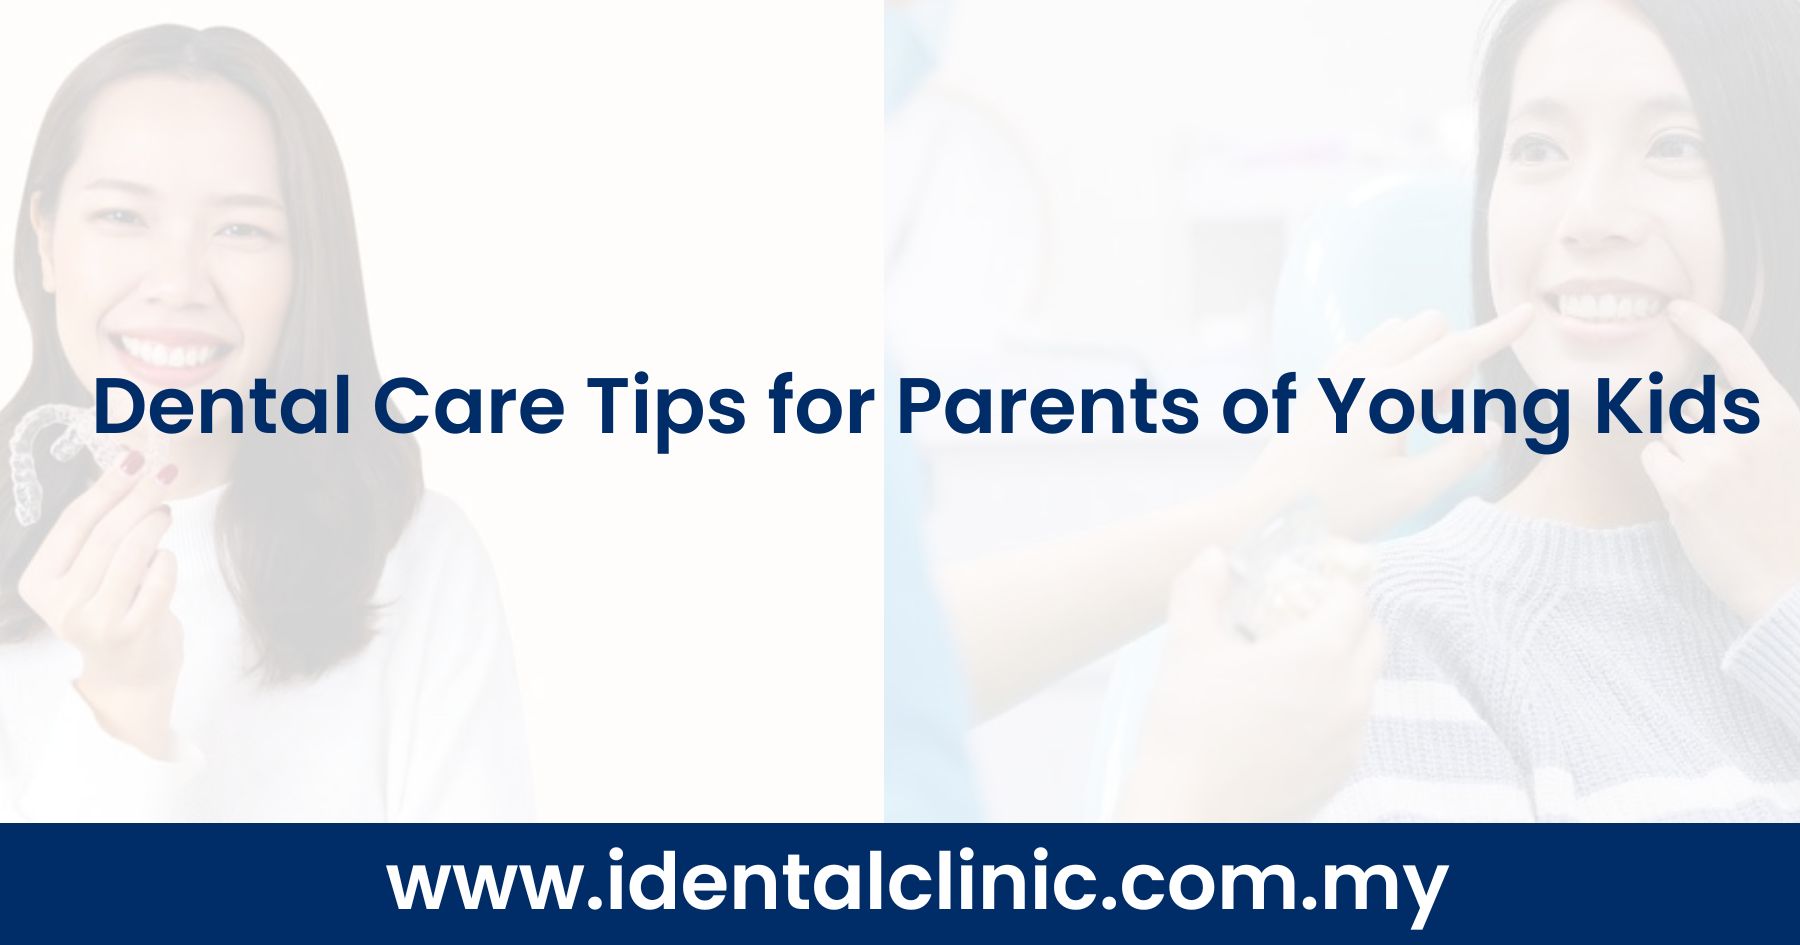 Dental Care Tips for Parents of Young Kids